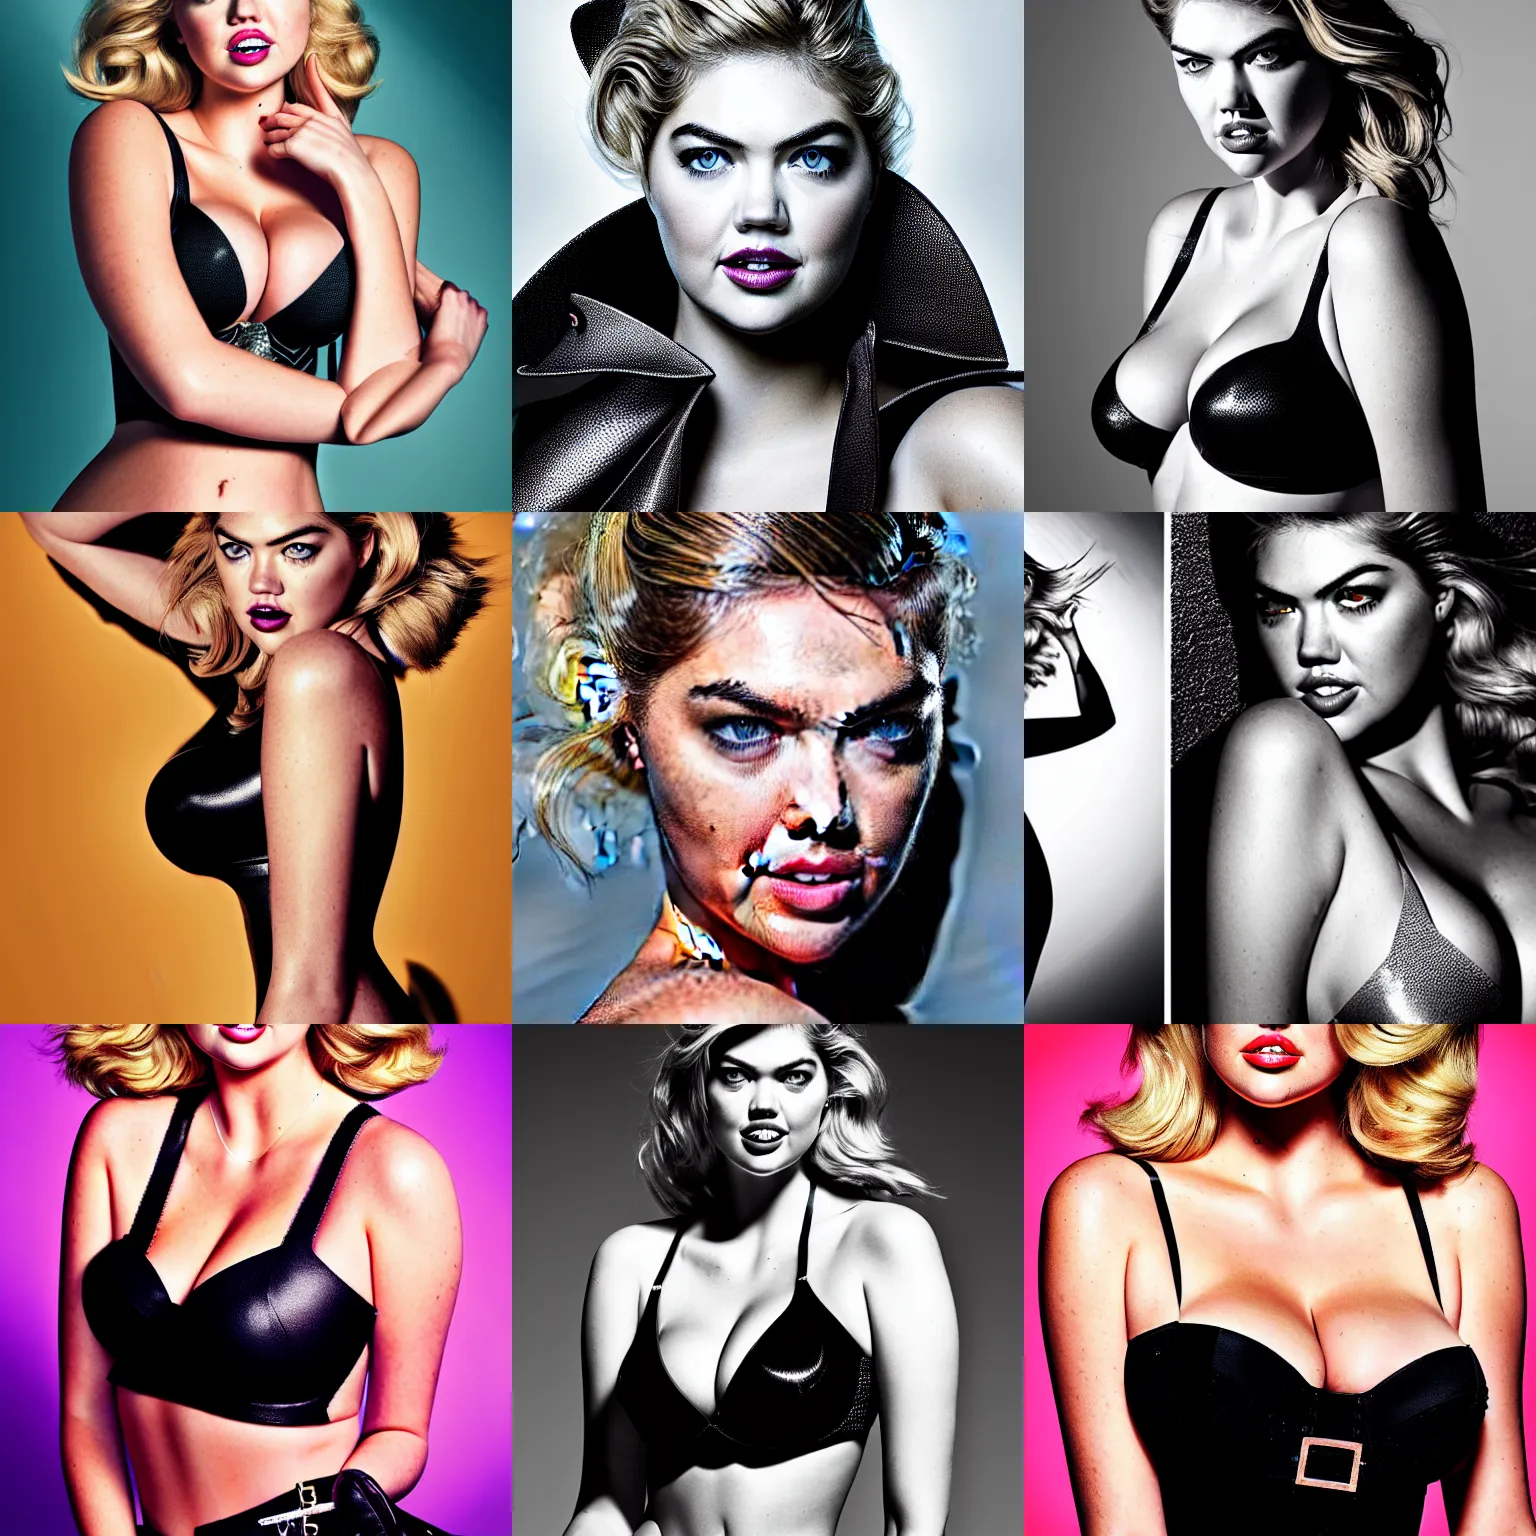 Prompt: a professional photograph of kate upton at catwoman in the style of petter hegre, sharp details, studio lighting